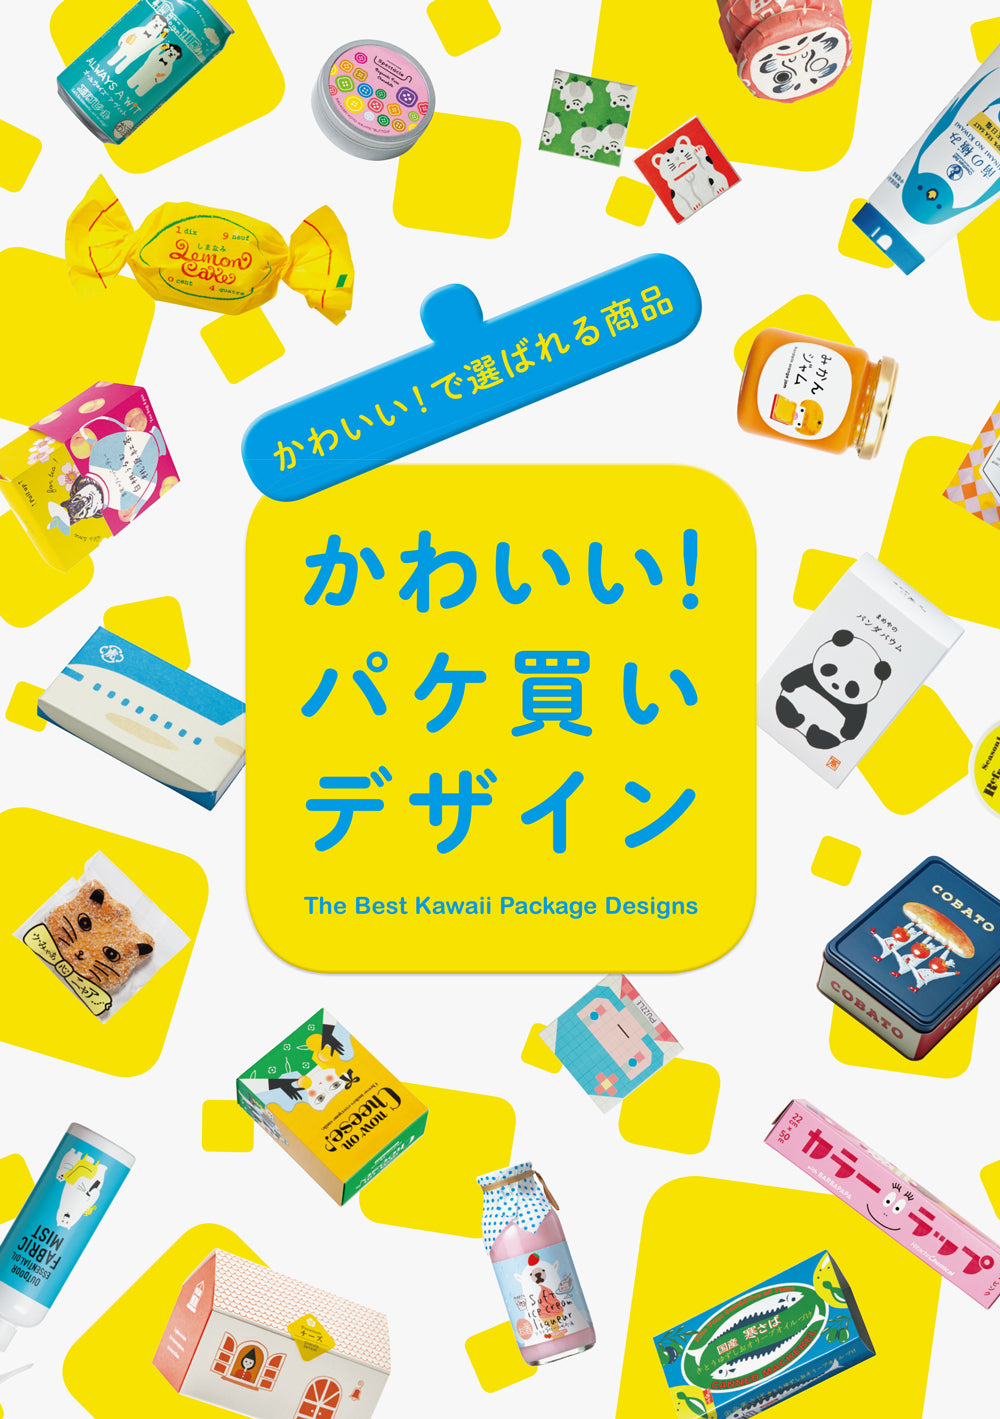 Best Kawaii Package Designs (Japanese only, mostly visual) cover